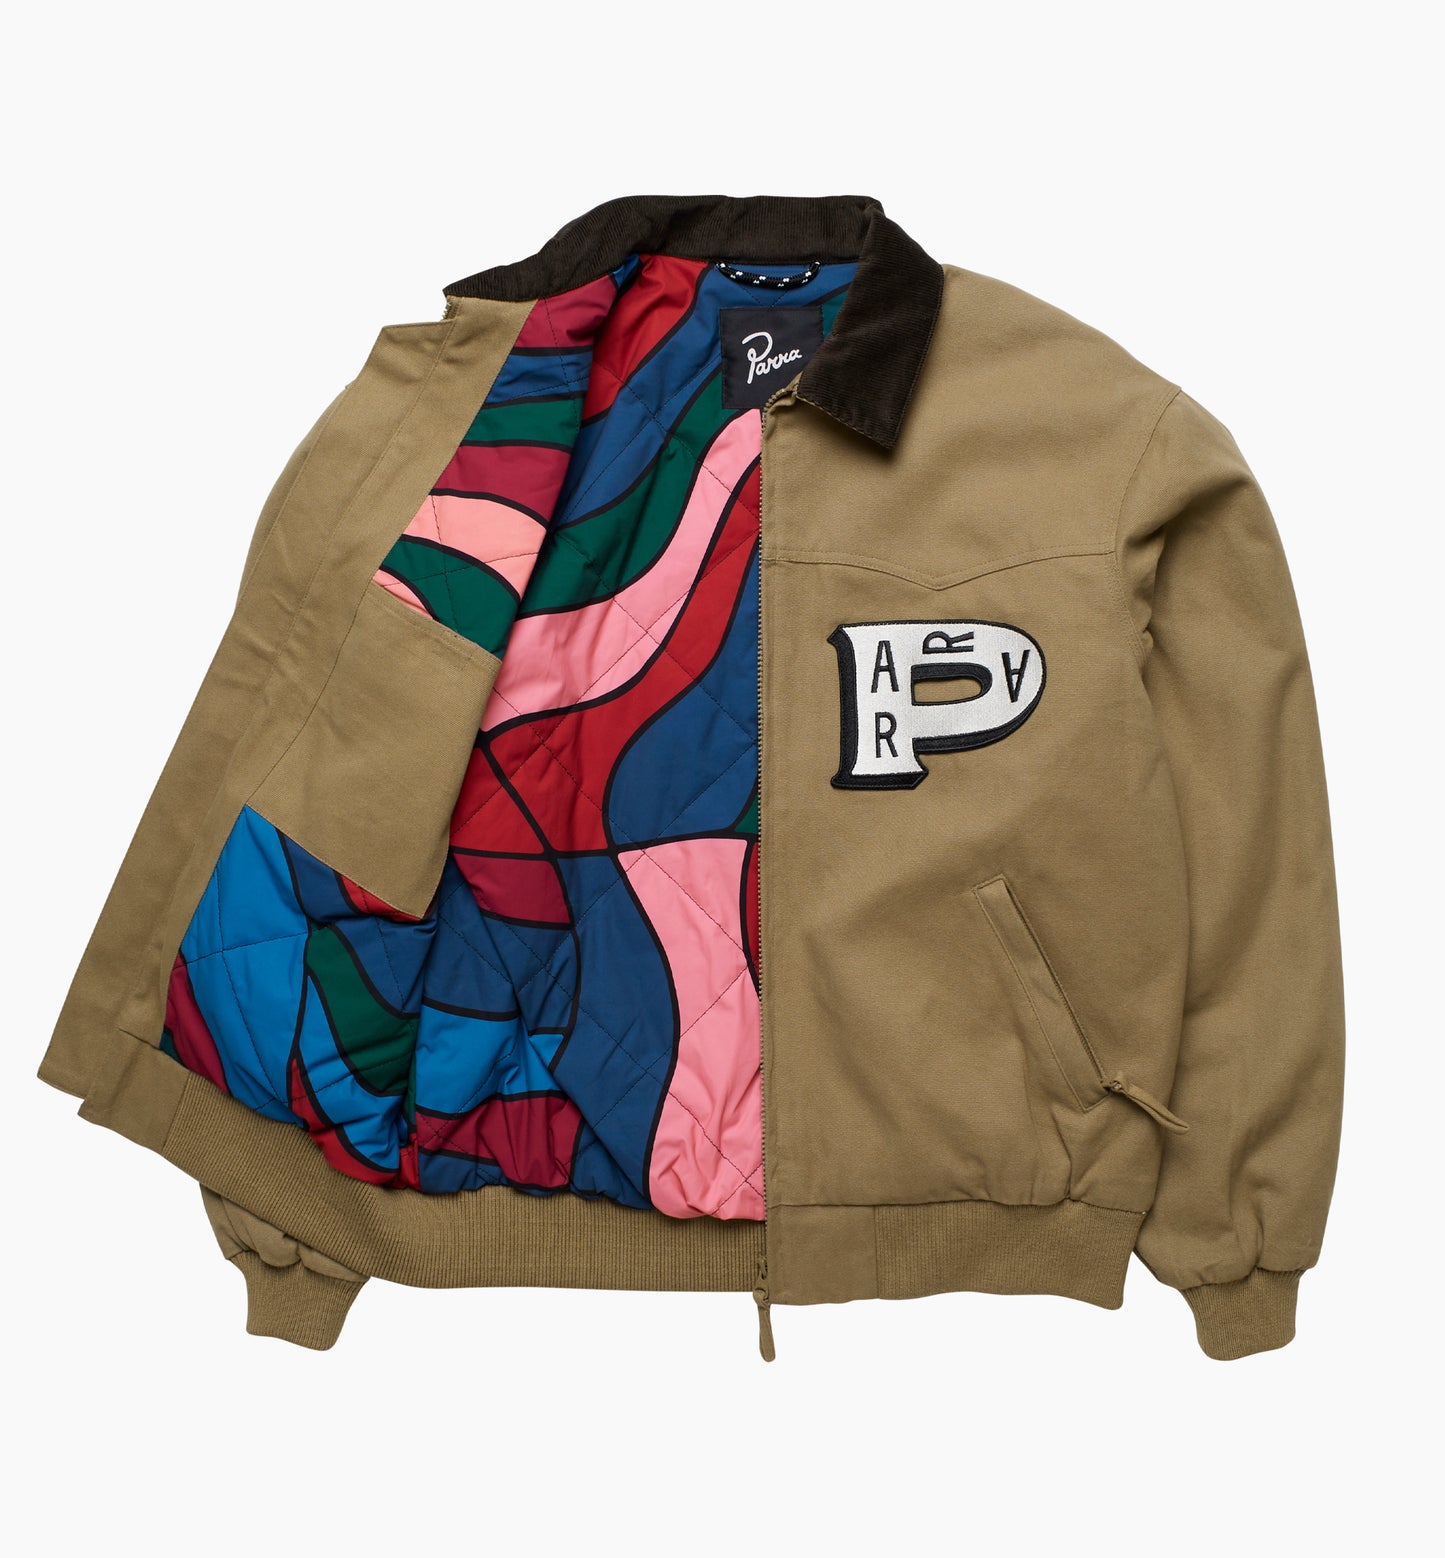 By Parra Worked P Jacket